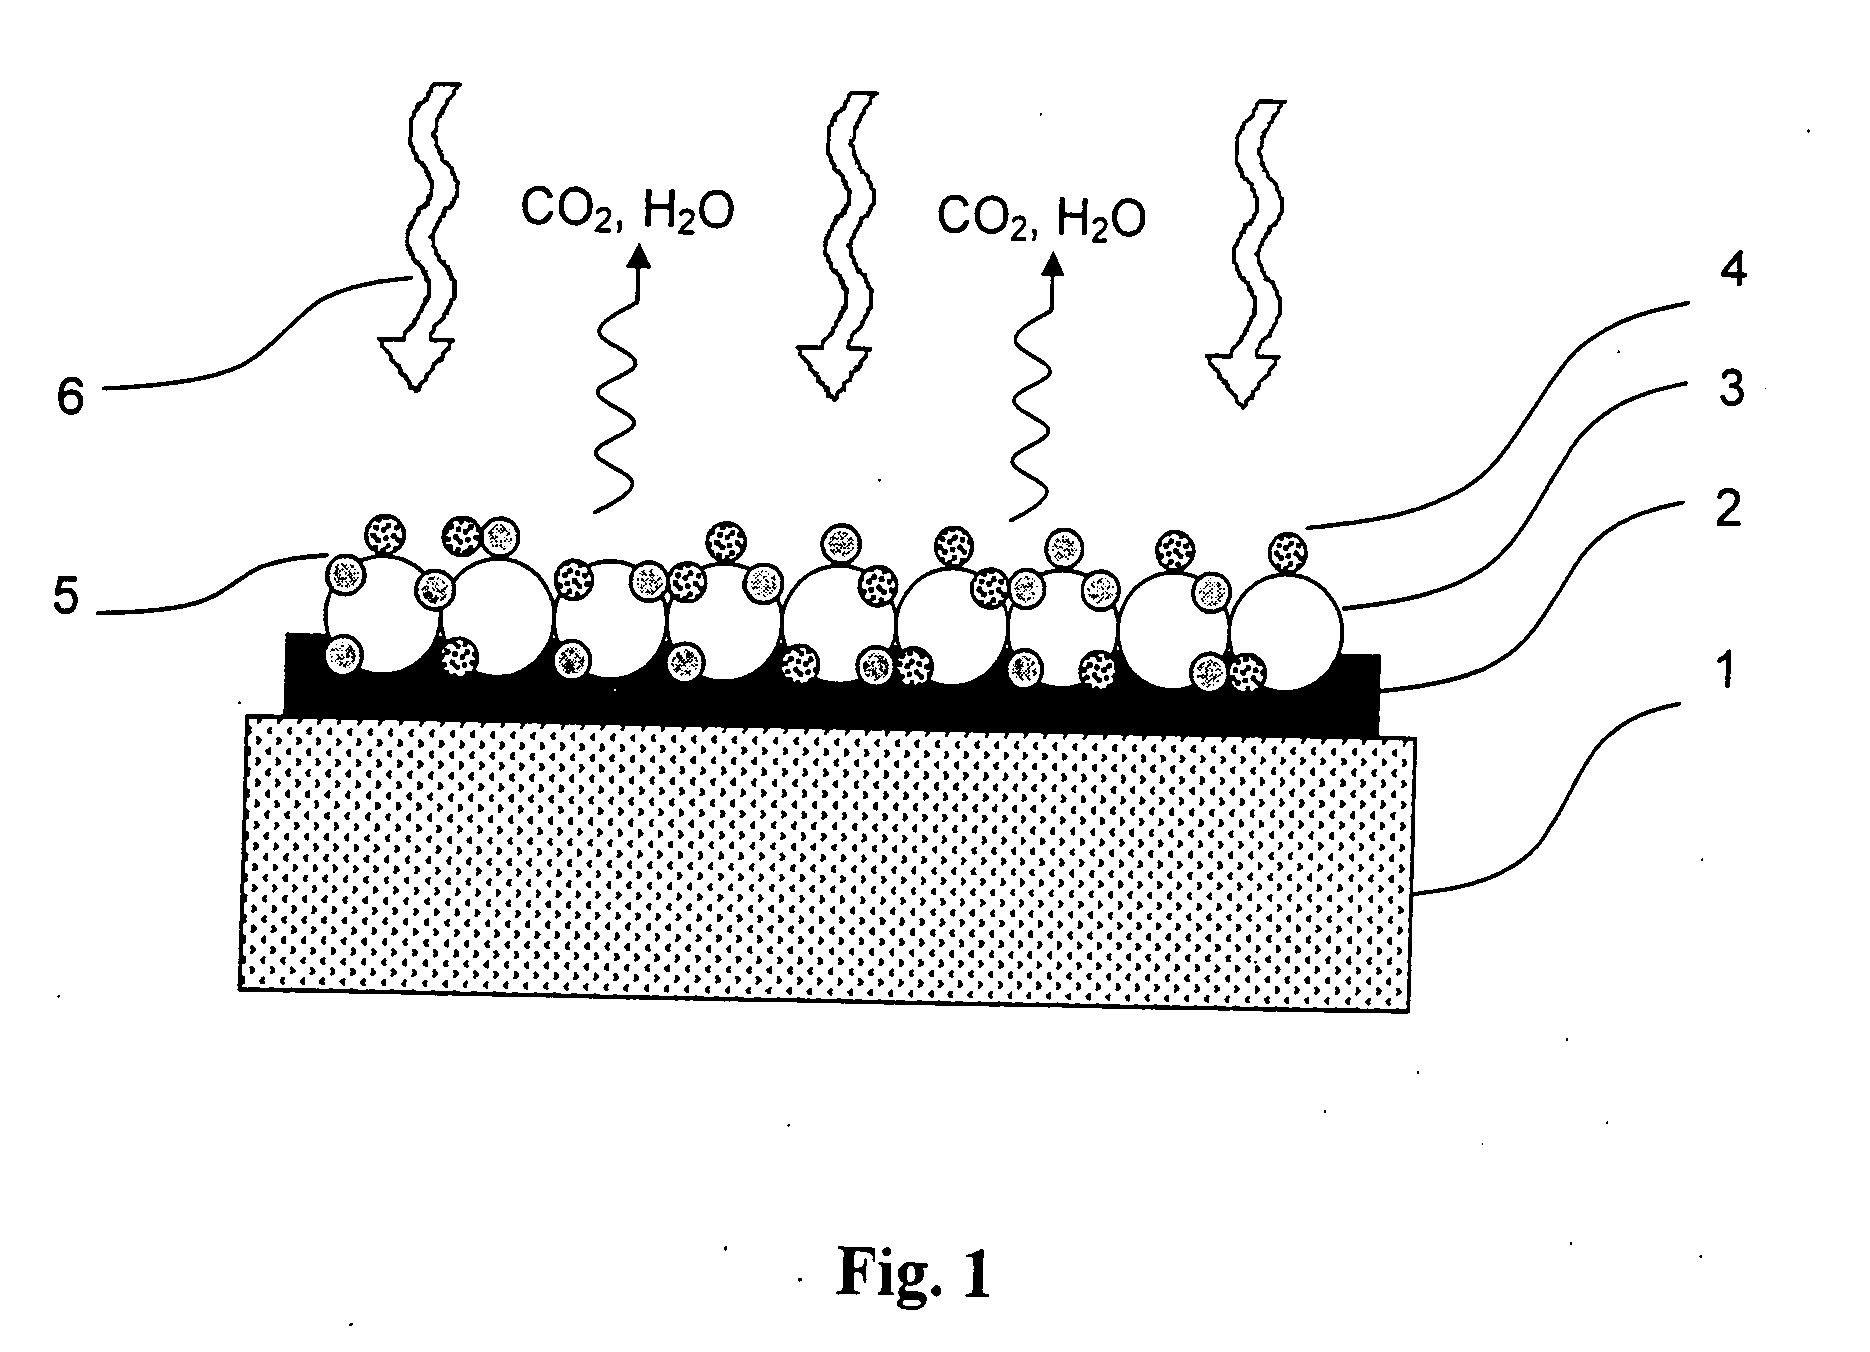 Method for masking and removing stains from rugged solid surfaces